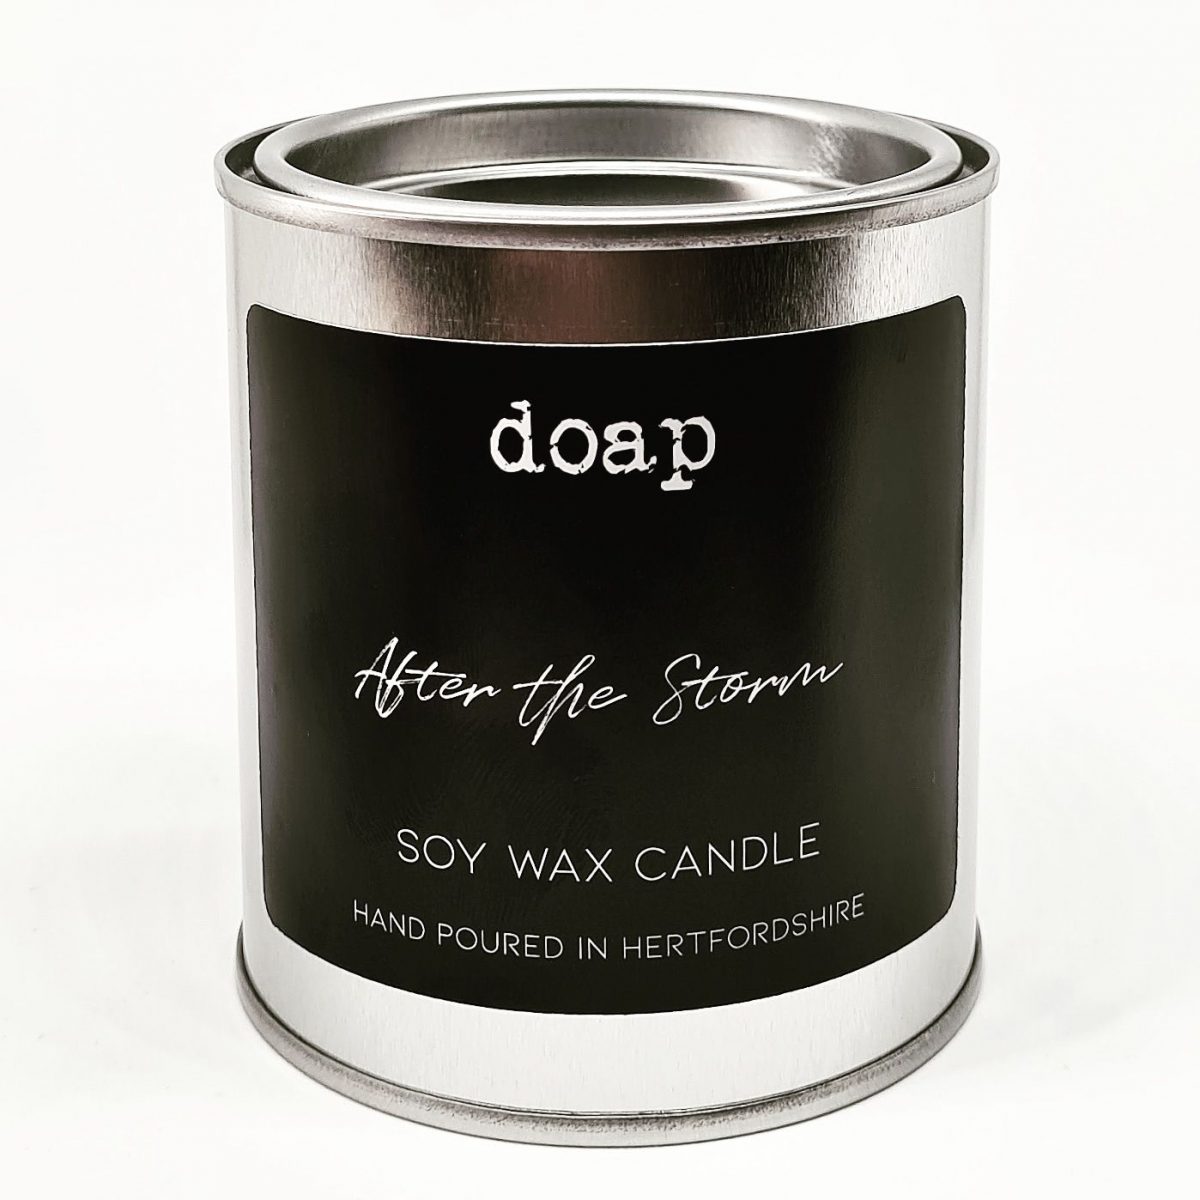 DOAP After The Storm Vegan Soy Wax Tinned Candle 250g